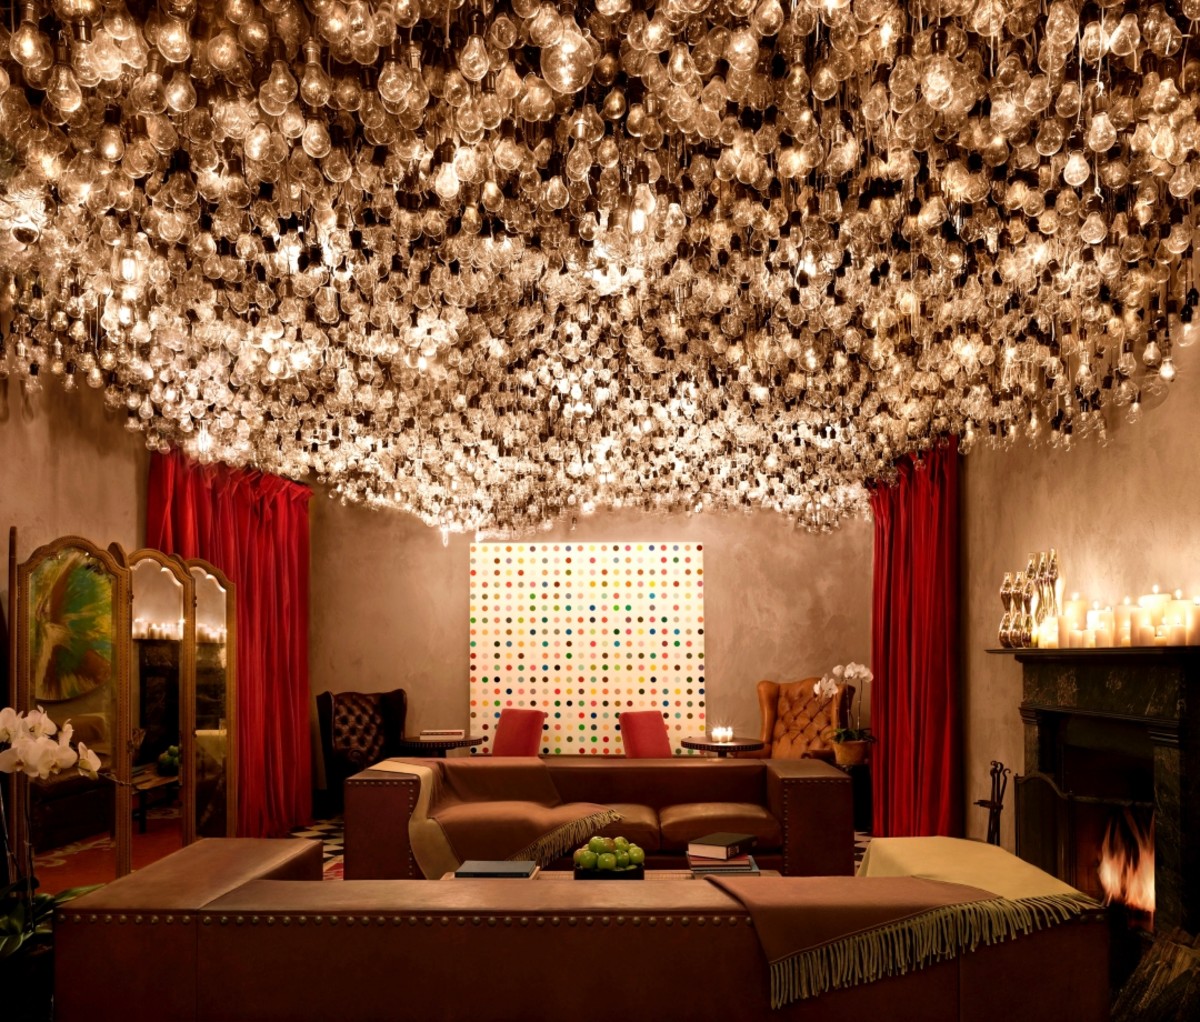 Gramercy Park Hotel interior with lights on ceiling